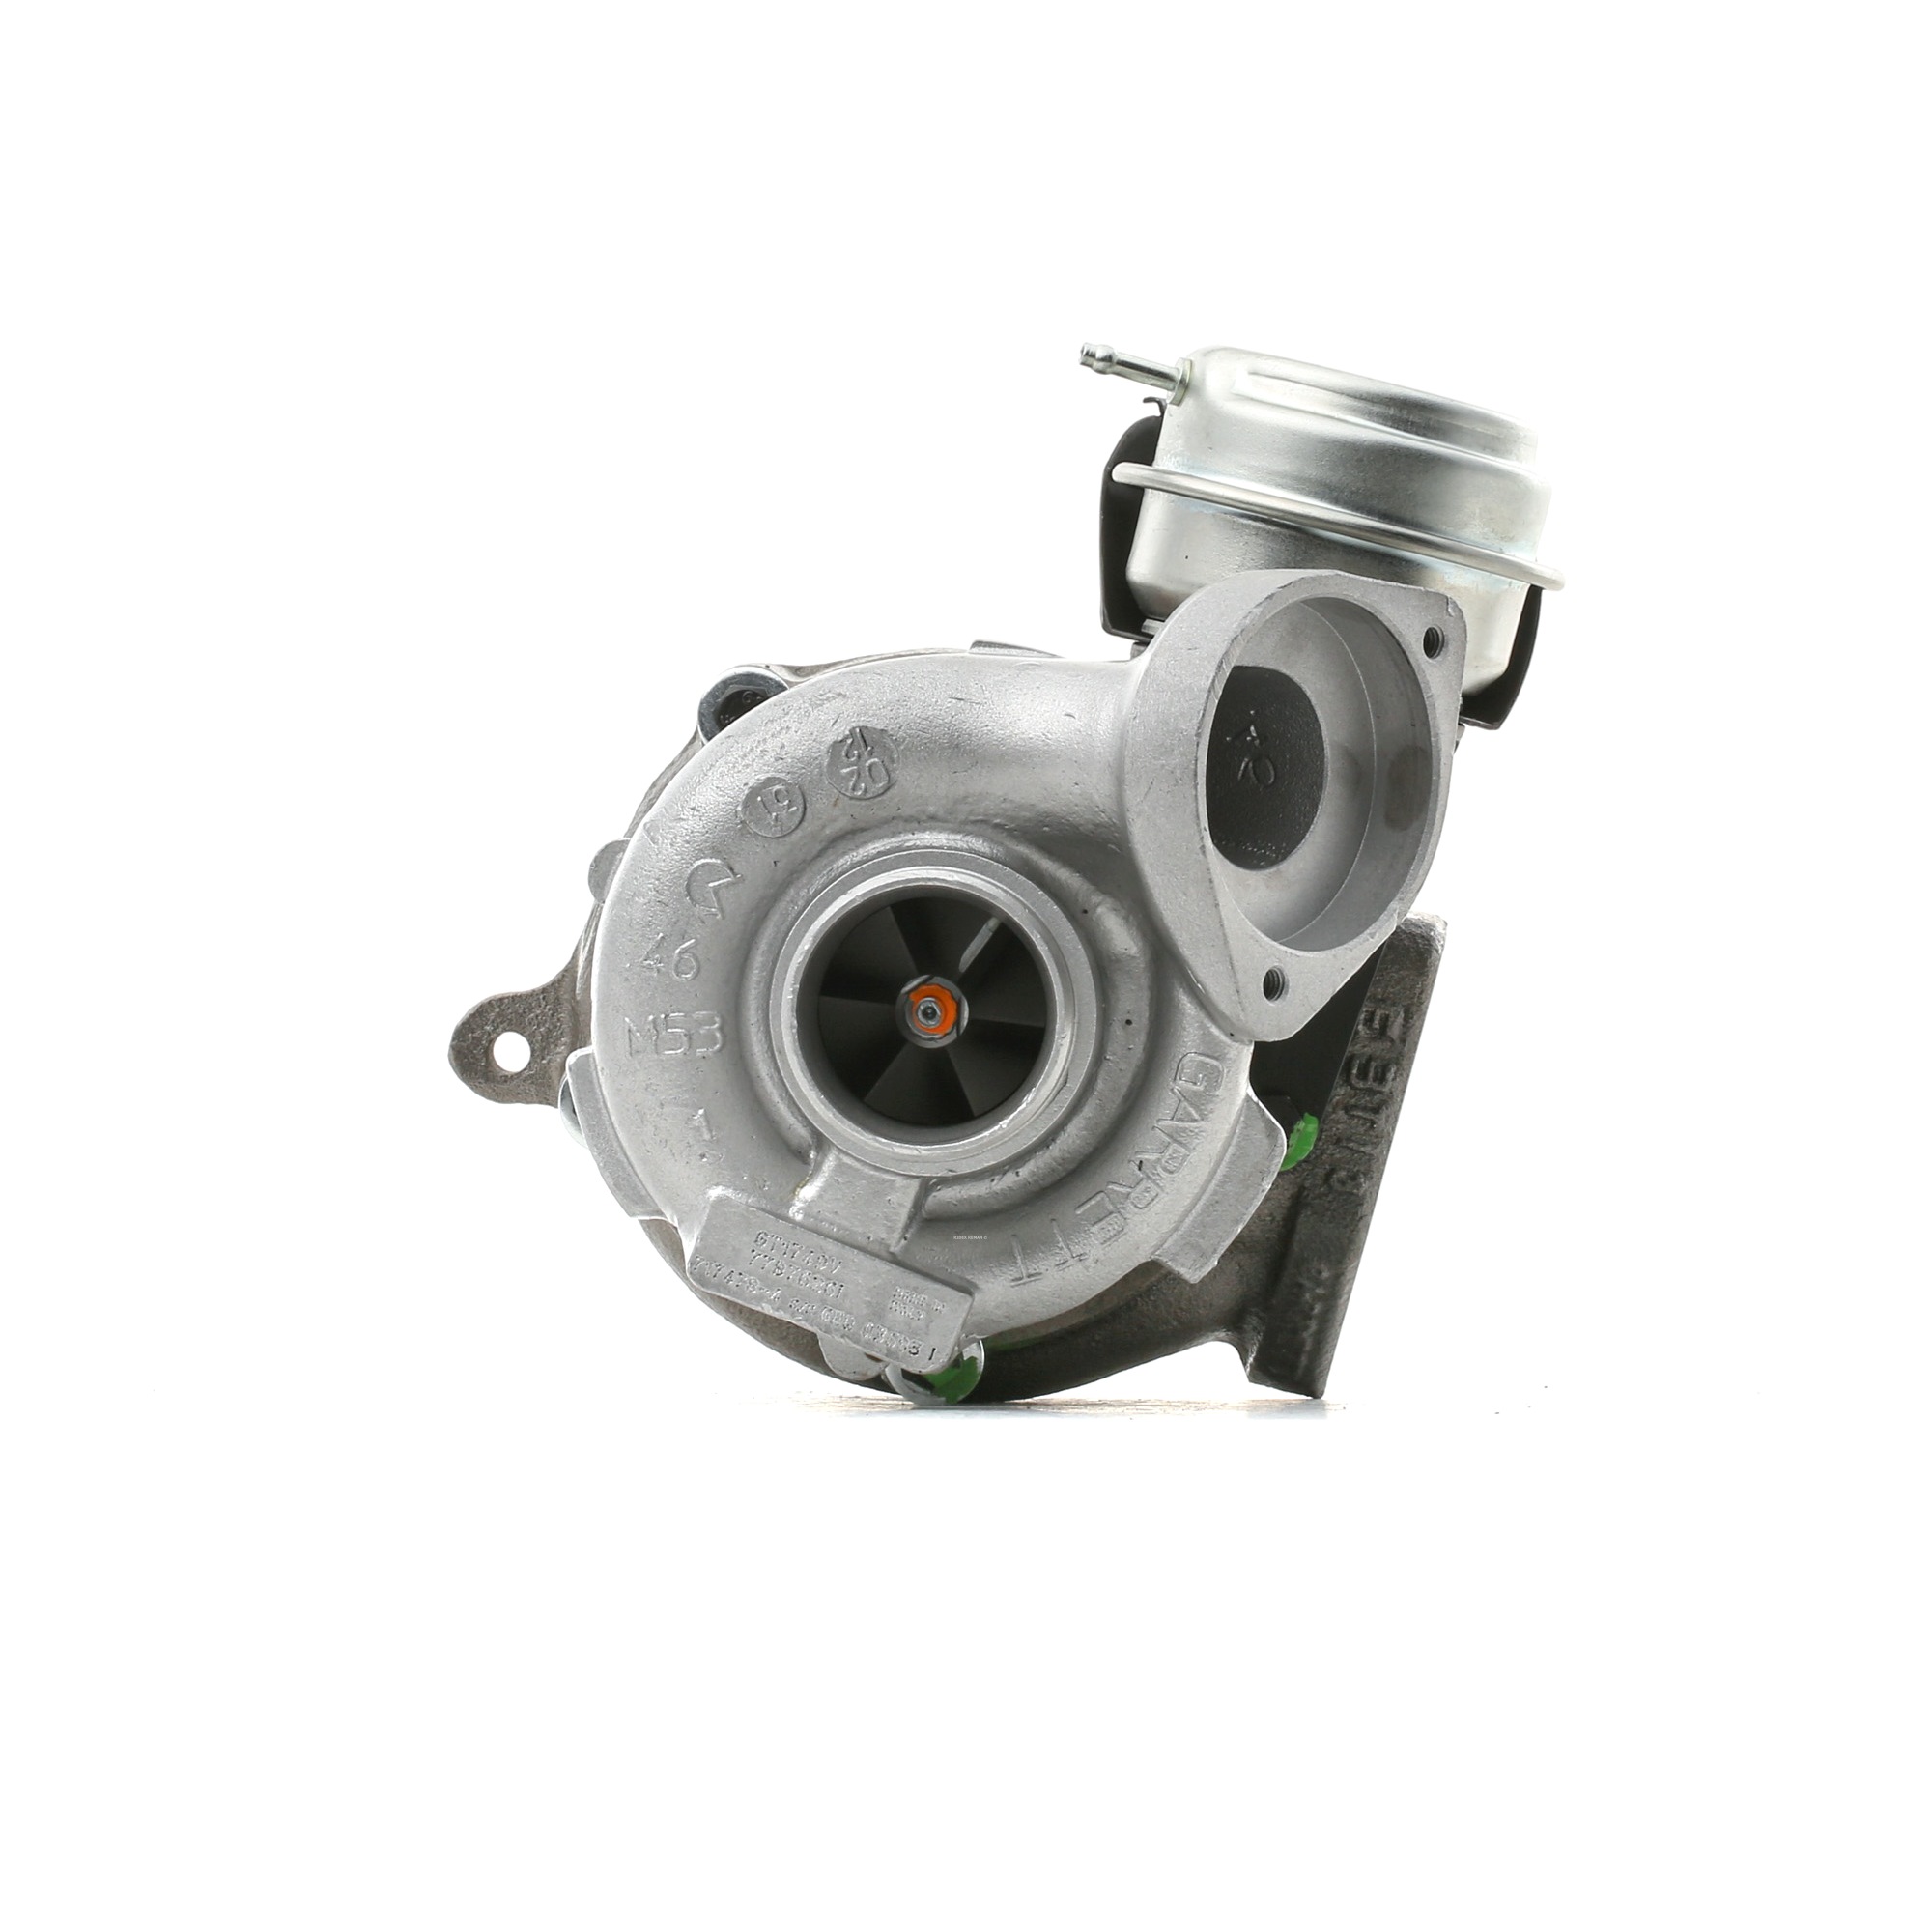 RIDEX REMAN Turbocharger/Charge Air cooler, VTG turbocharger, Pneumatic, with gaskets/seals, with attachment material Turbo 2234C0195R buy